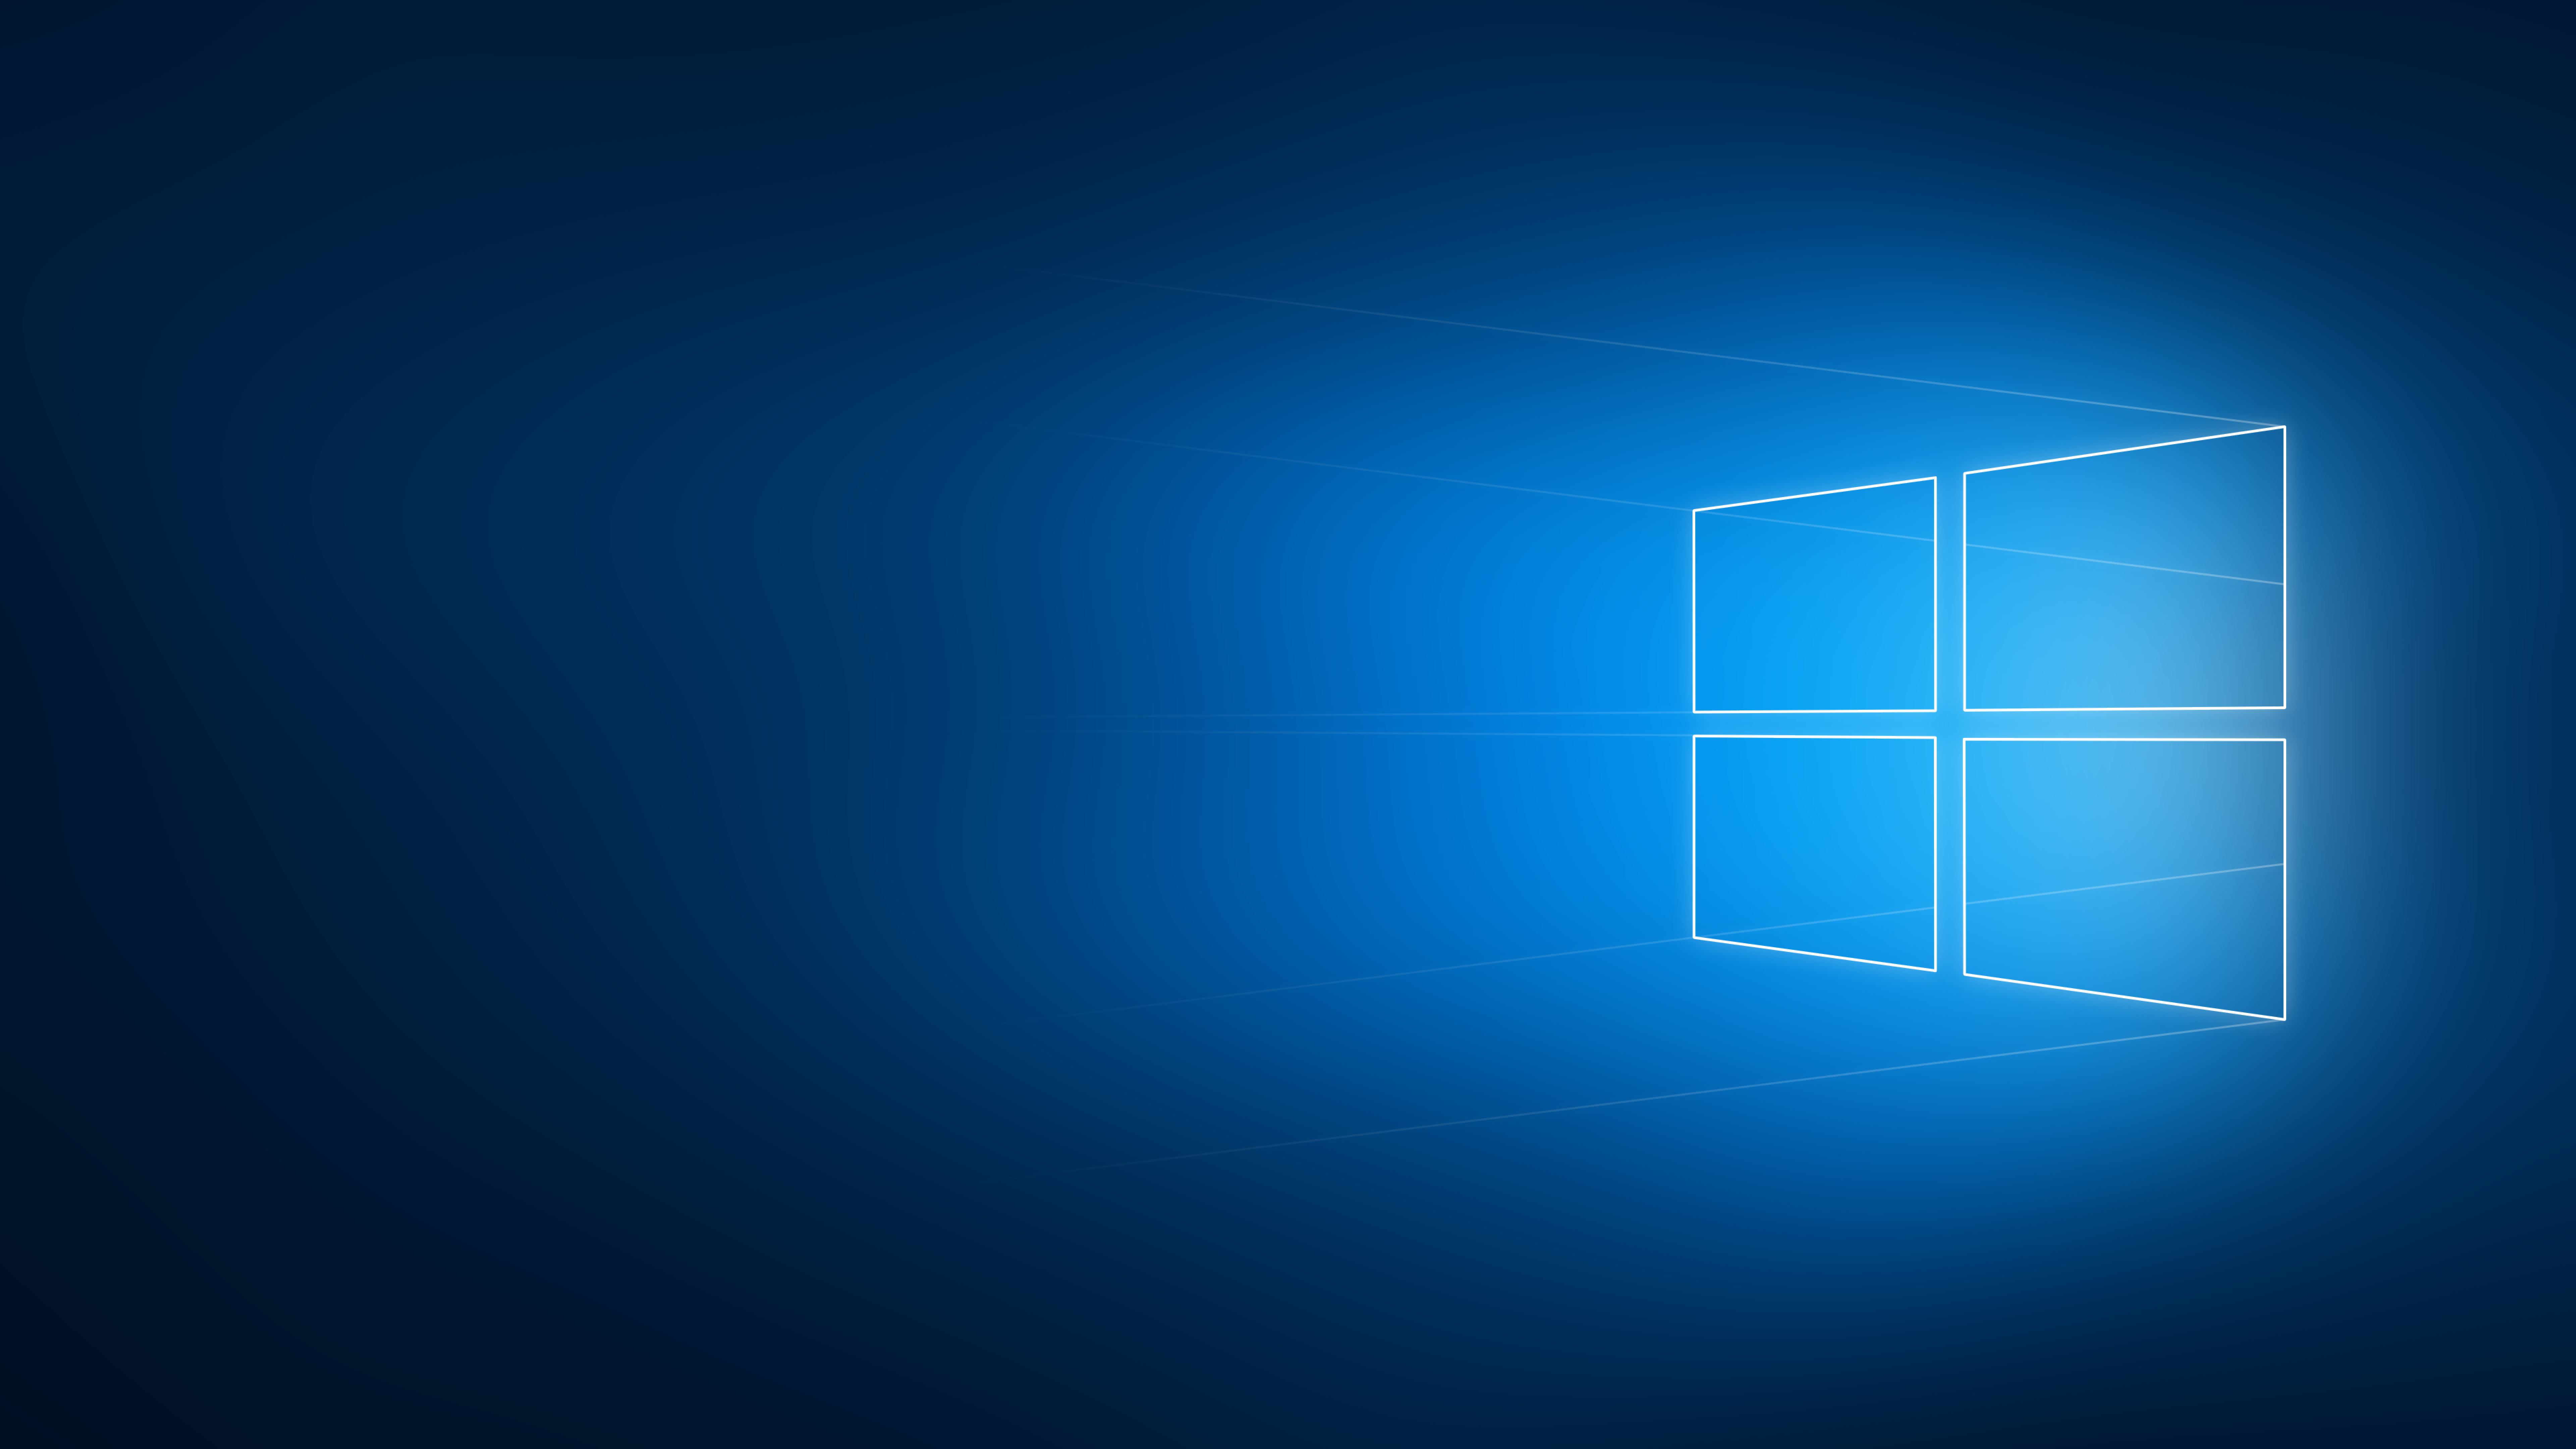 7680x4320 Windows 10 Hero Logo 8K Wallpaper HD Brands 4K Wallpapers Images Photos and Background